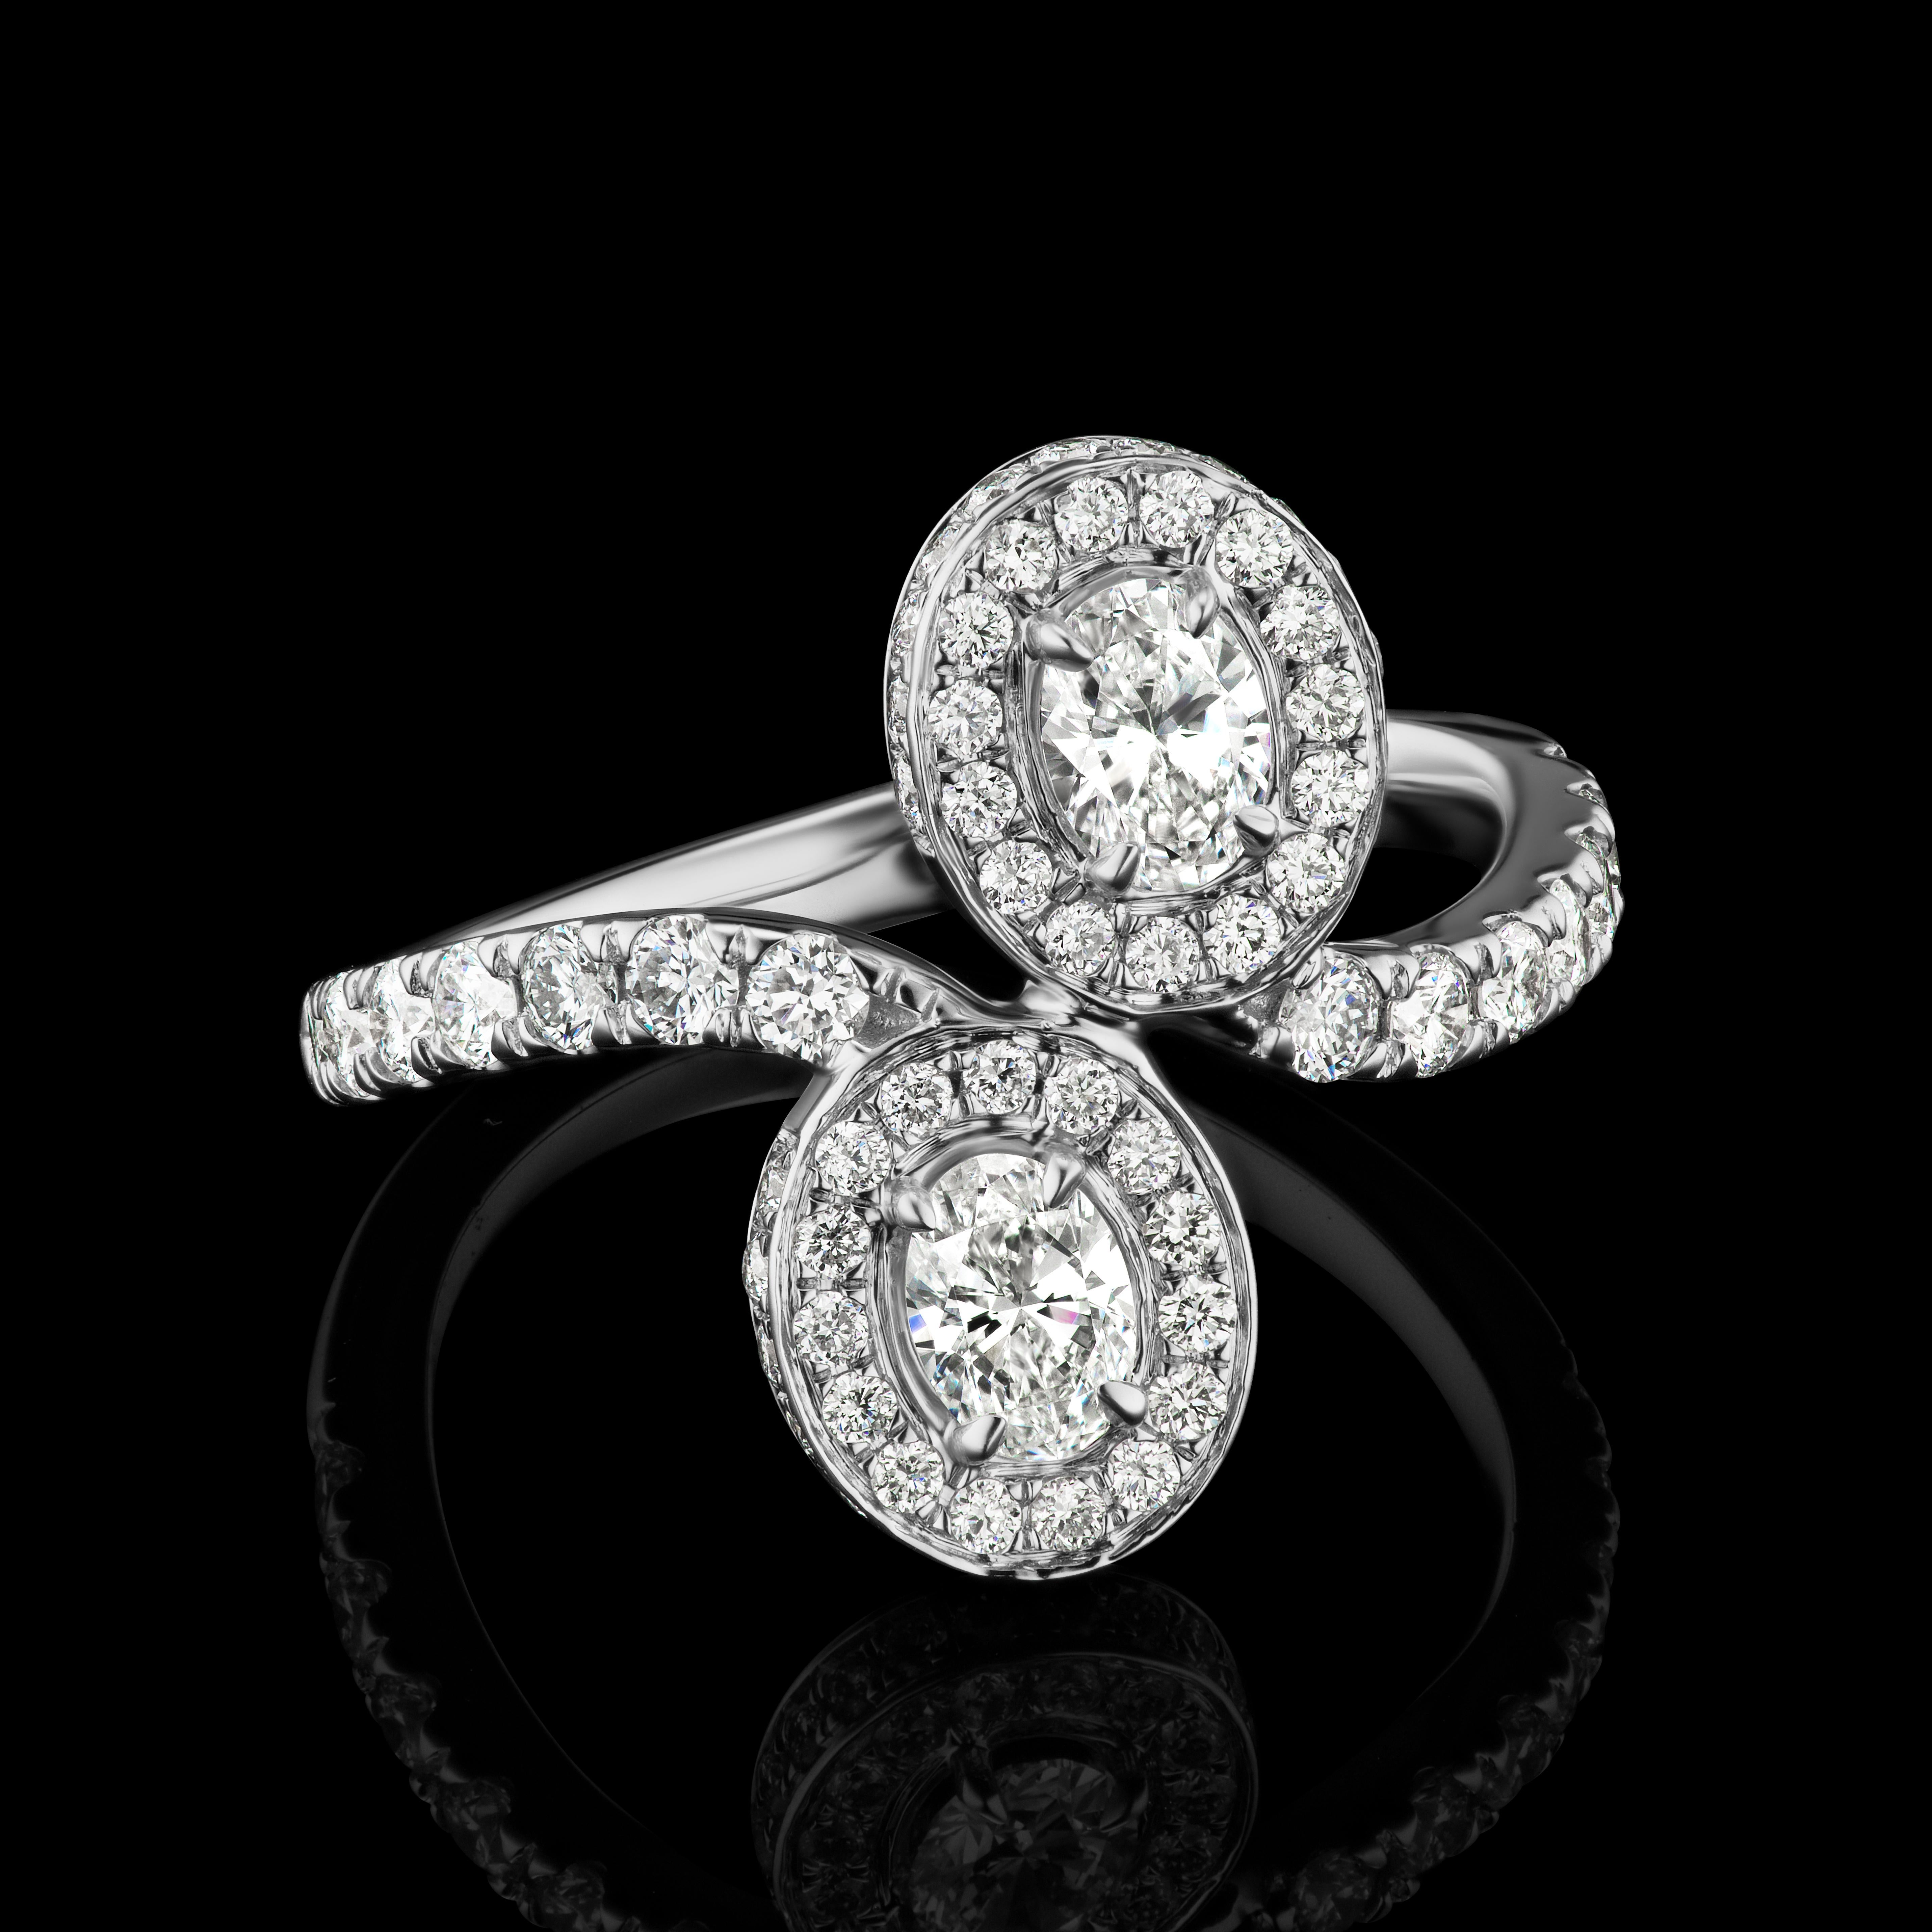 Forever Us Oval Diamond Ring in 18K White Gold ( 1.37 ct. tw. )

Classic and elegant, this ring made with two matching oval diamonds symbolizes love in a perfectly delicate all around pave diamond halo. The shank is also embellished with pave